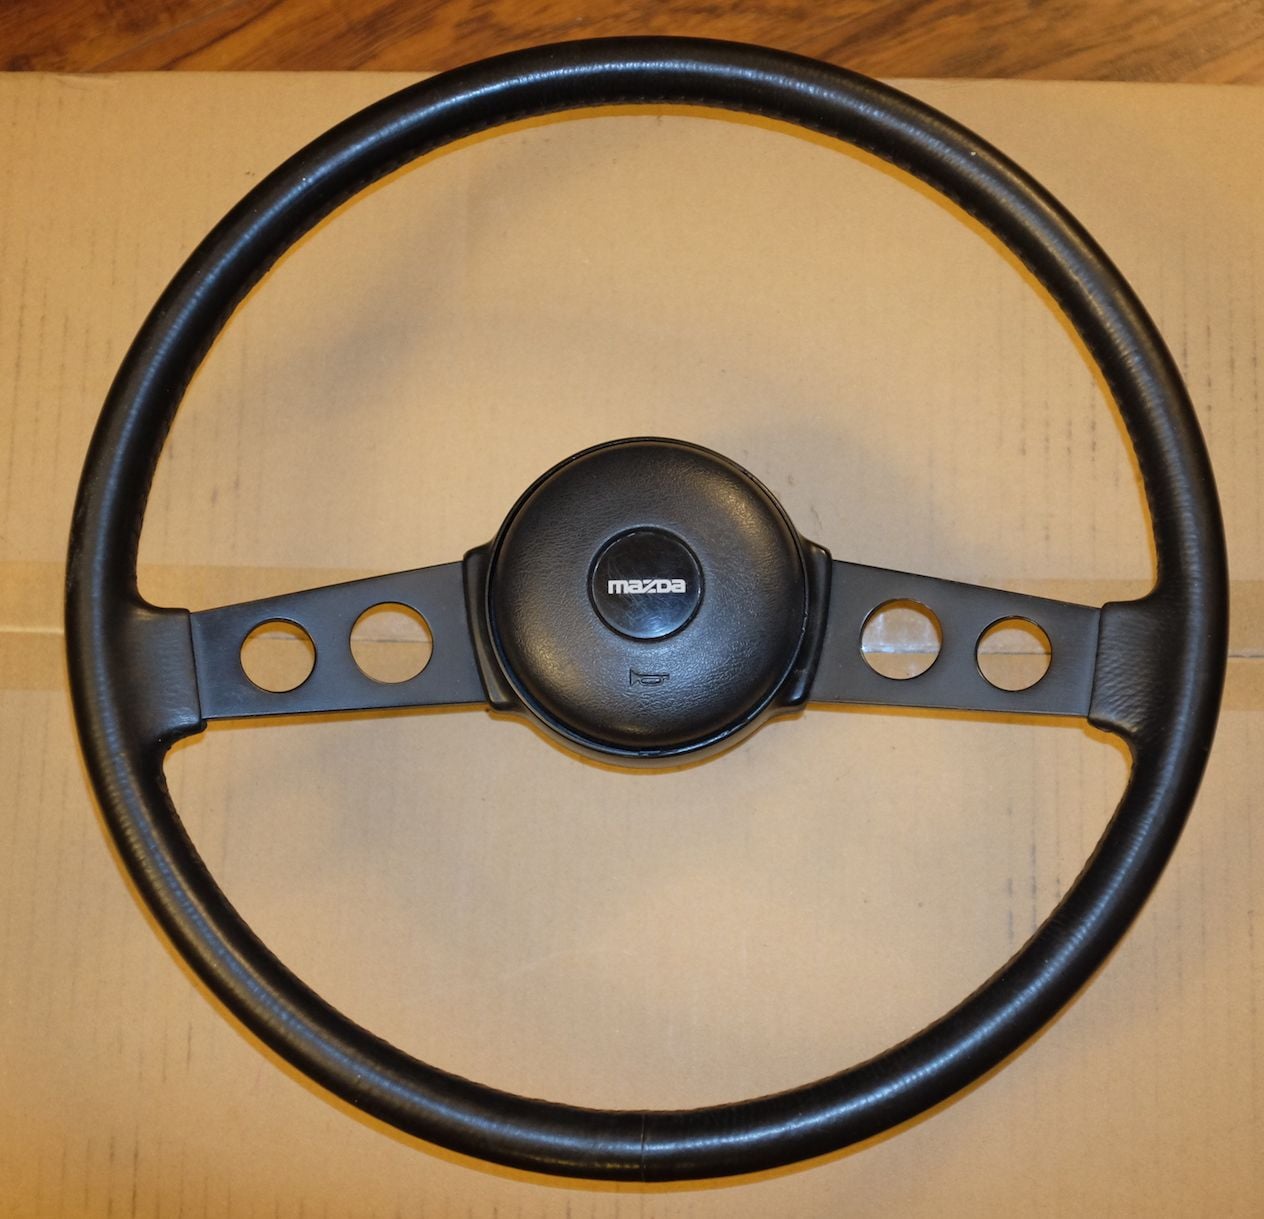 Interior/Upholstery - 2-spoke and 4-spoke 1st gen steering wheels - Used - 1979 to 1985 Mazda RX-7 - Austin, TX 78731, United States